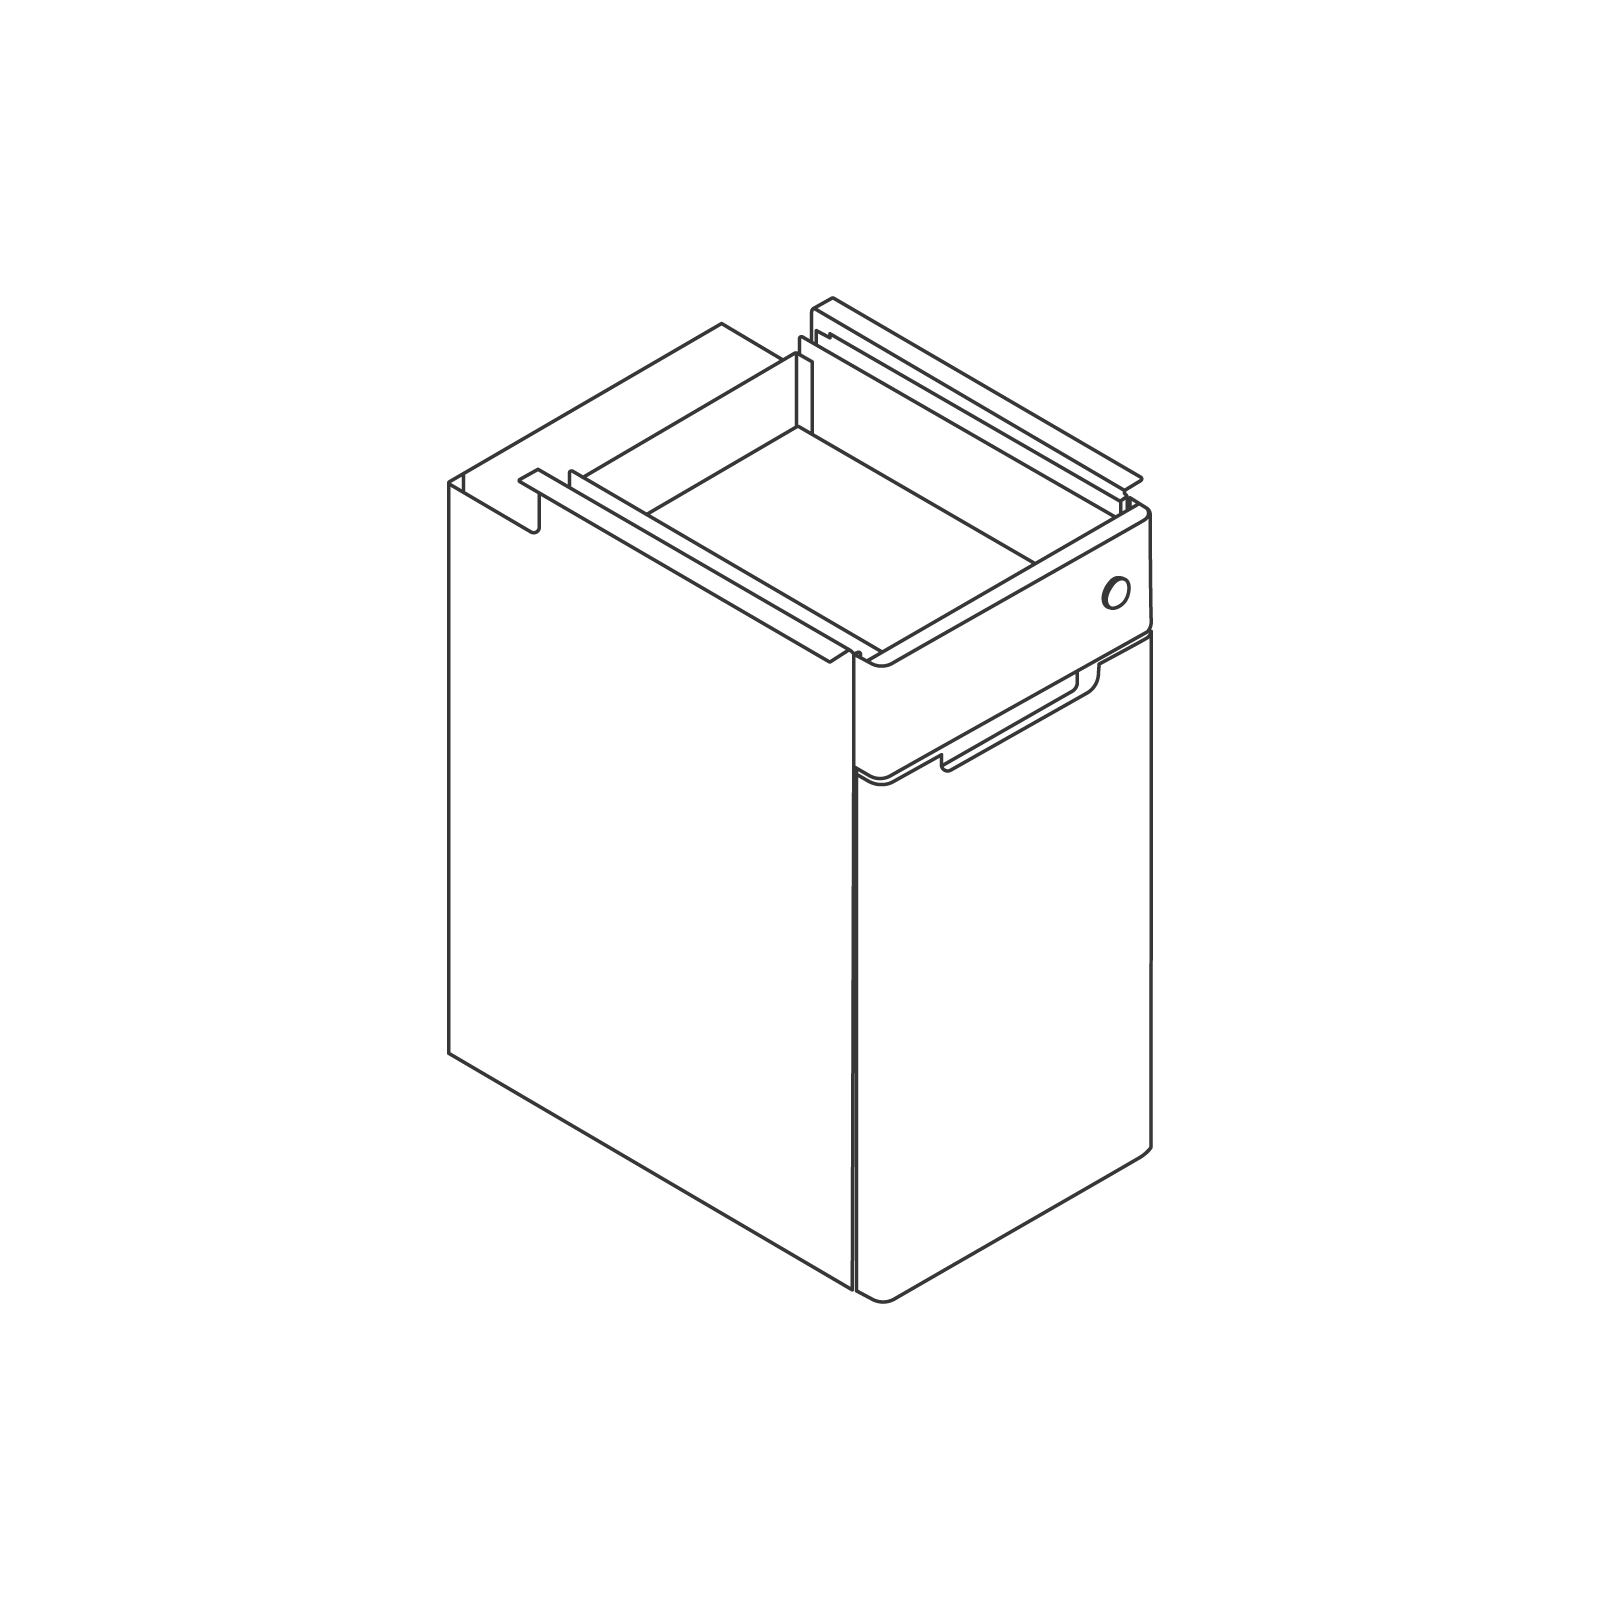 A line drawing - Ambit Large Suspended Storage–Closed